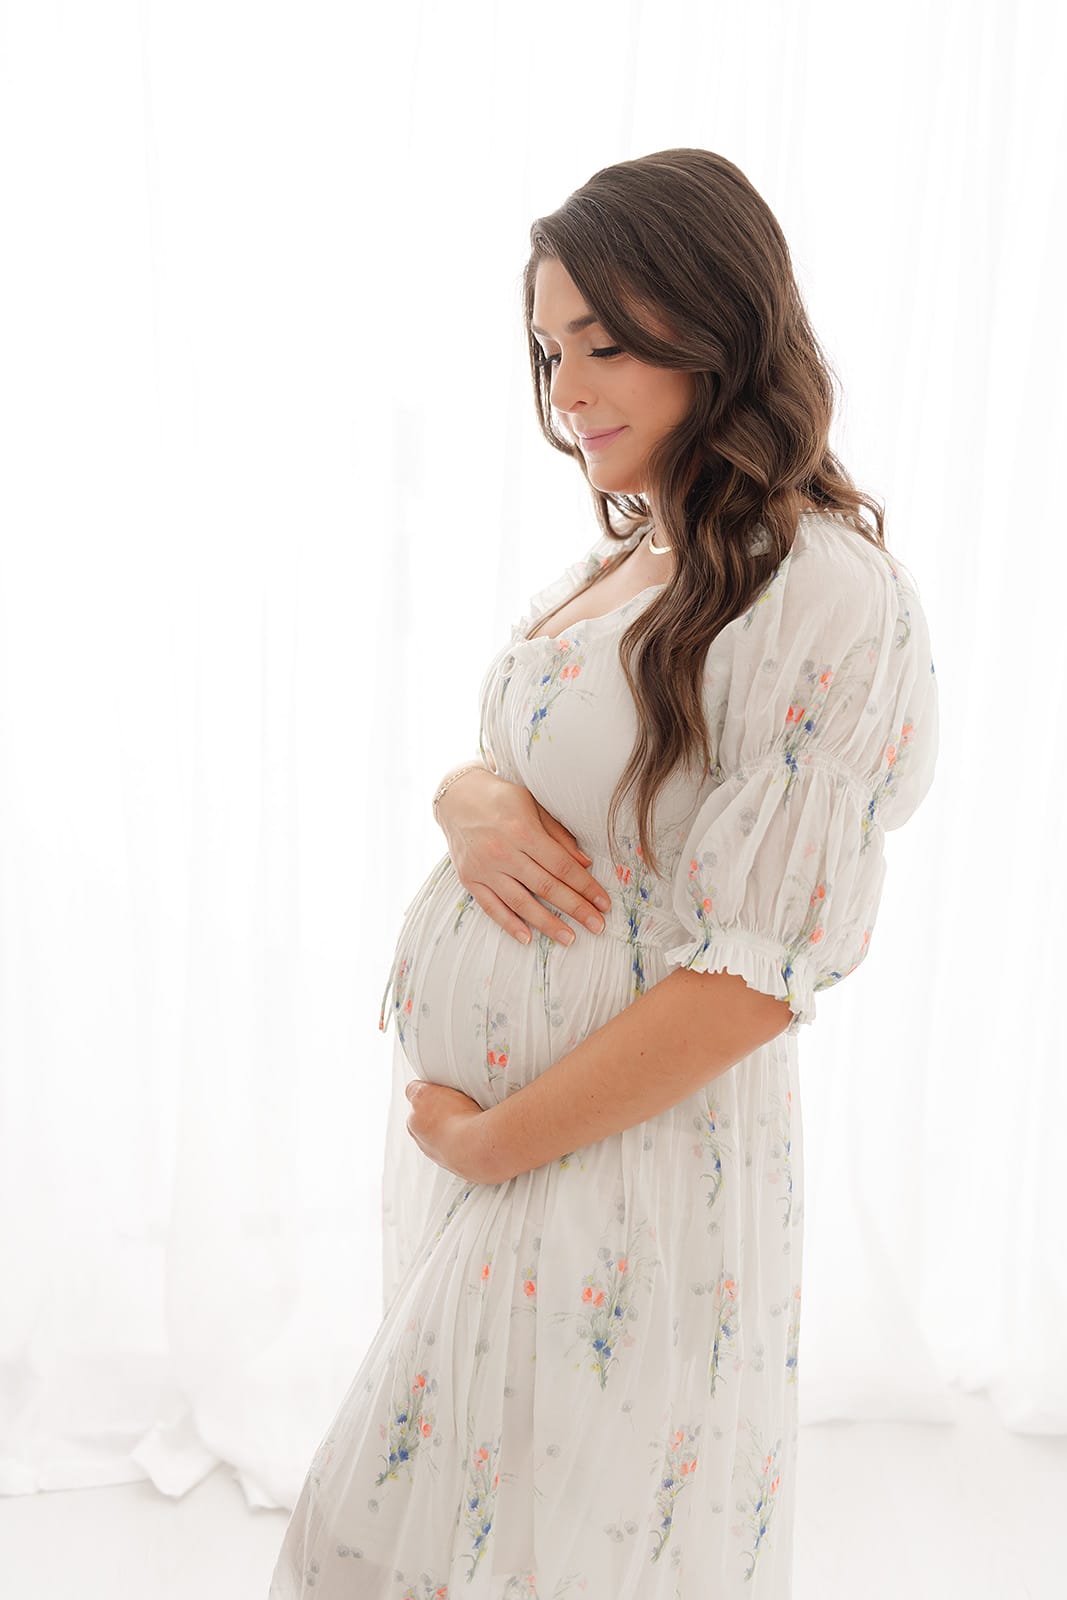 A pregnant woman in a floral dress poses in front of a white background, captured by a talented Pensacola maternity photographer.